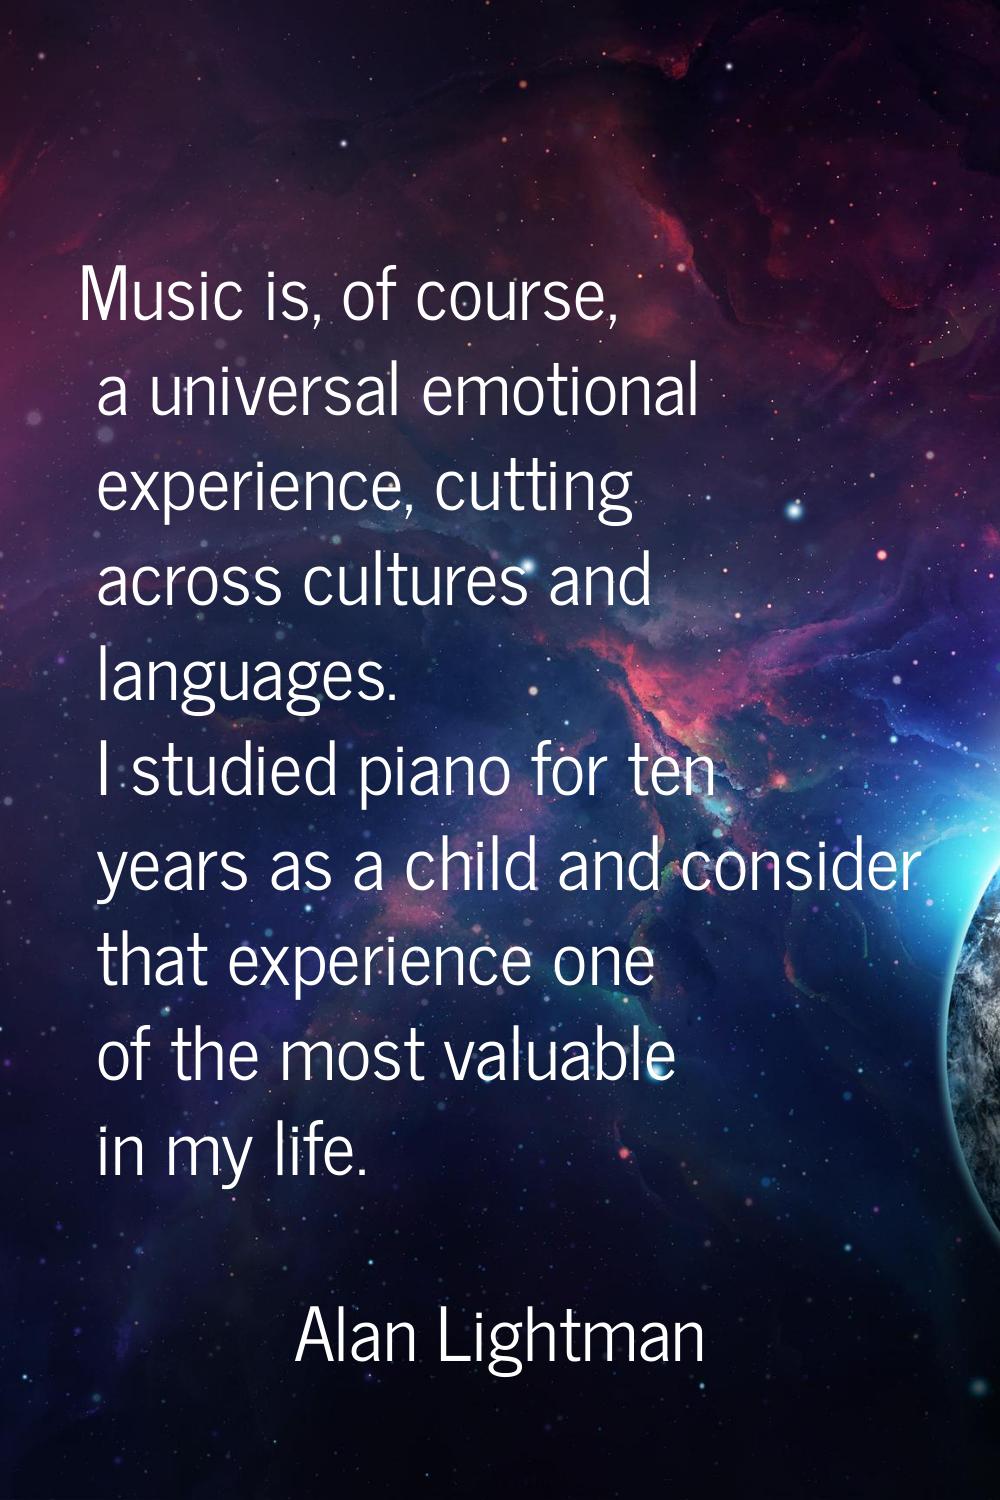 Music is, of course, a universal emotional experience, cutting across cultures and languages. I stu